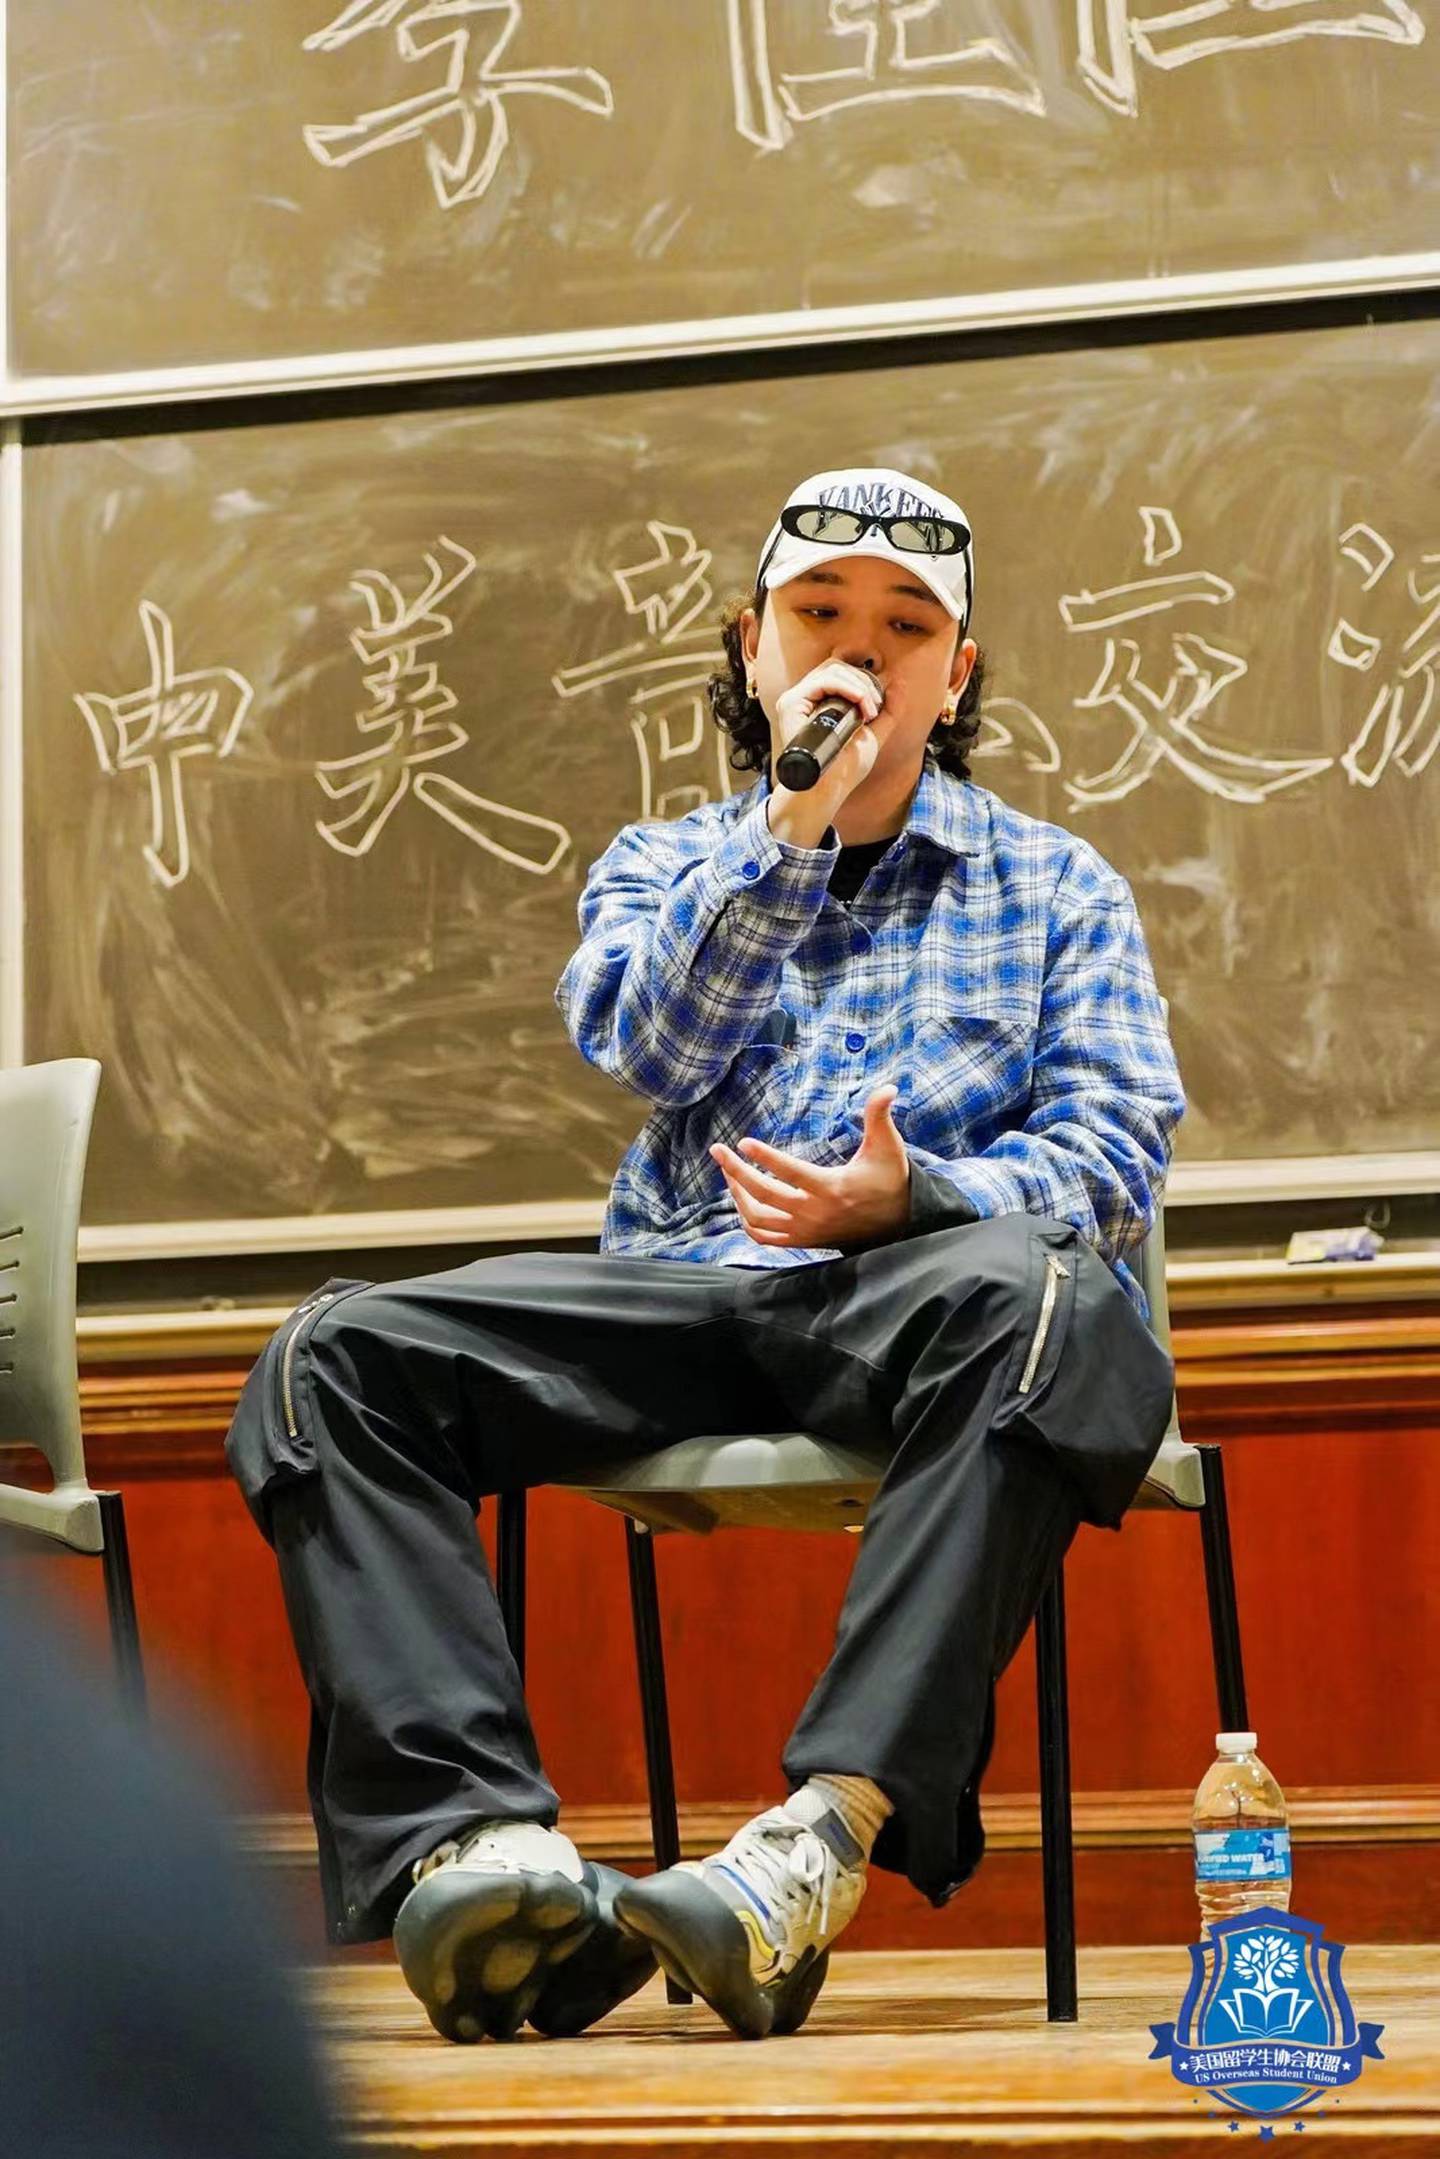 Photo of a man speaking into a microphone in front of a blackboard